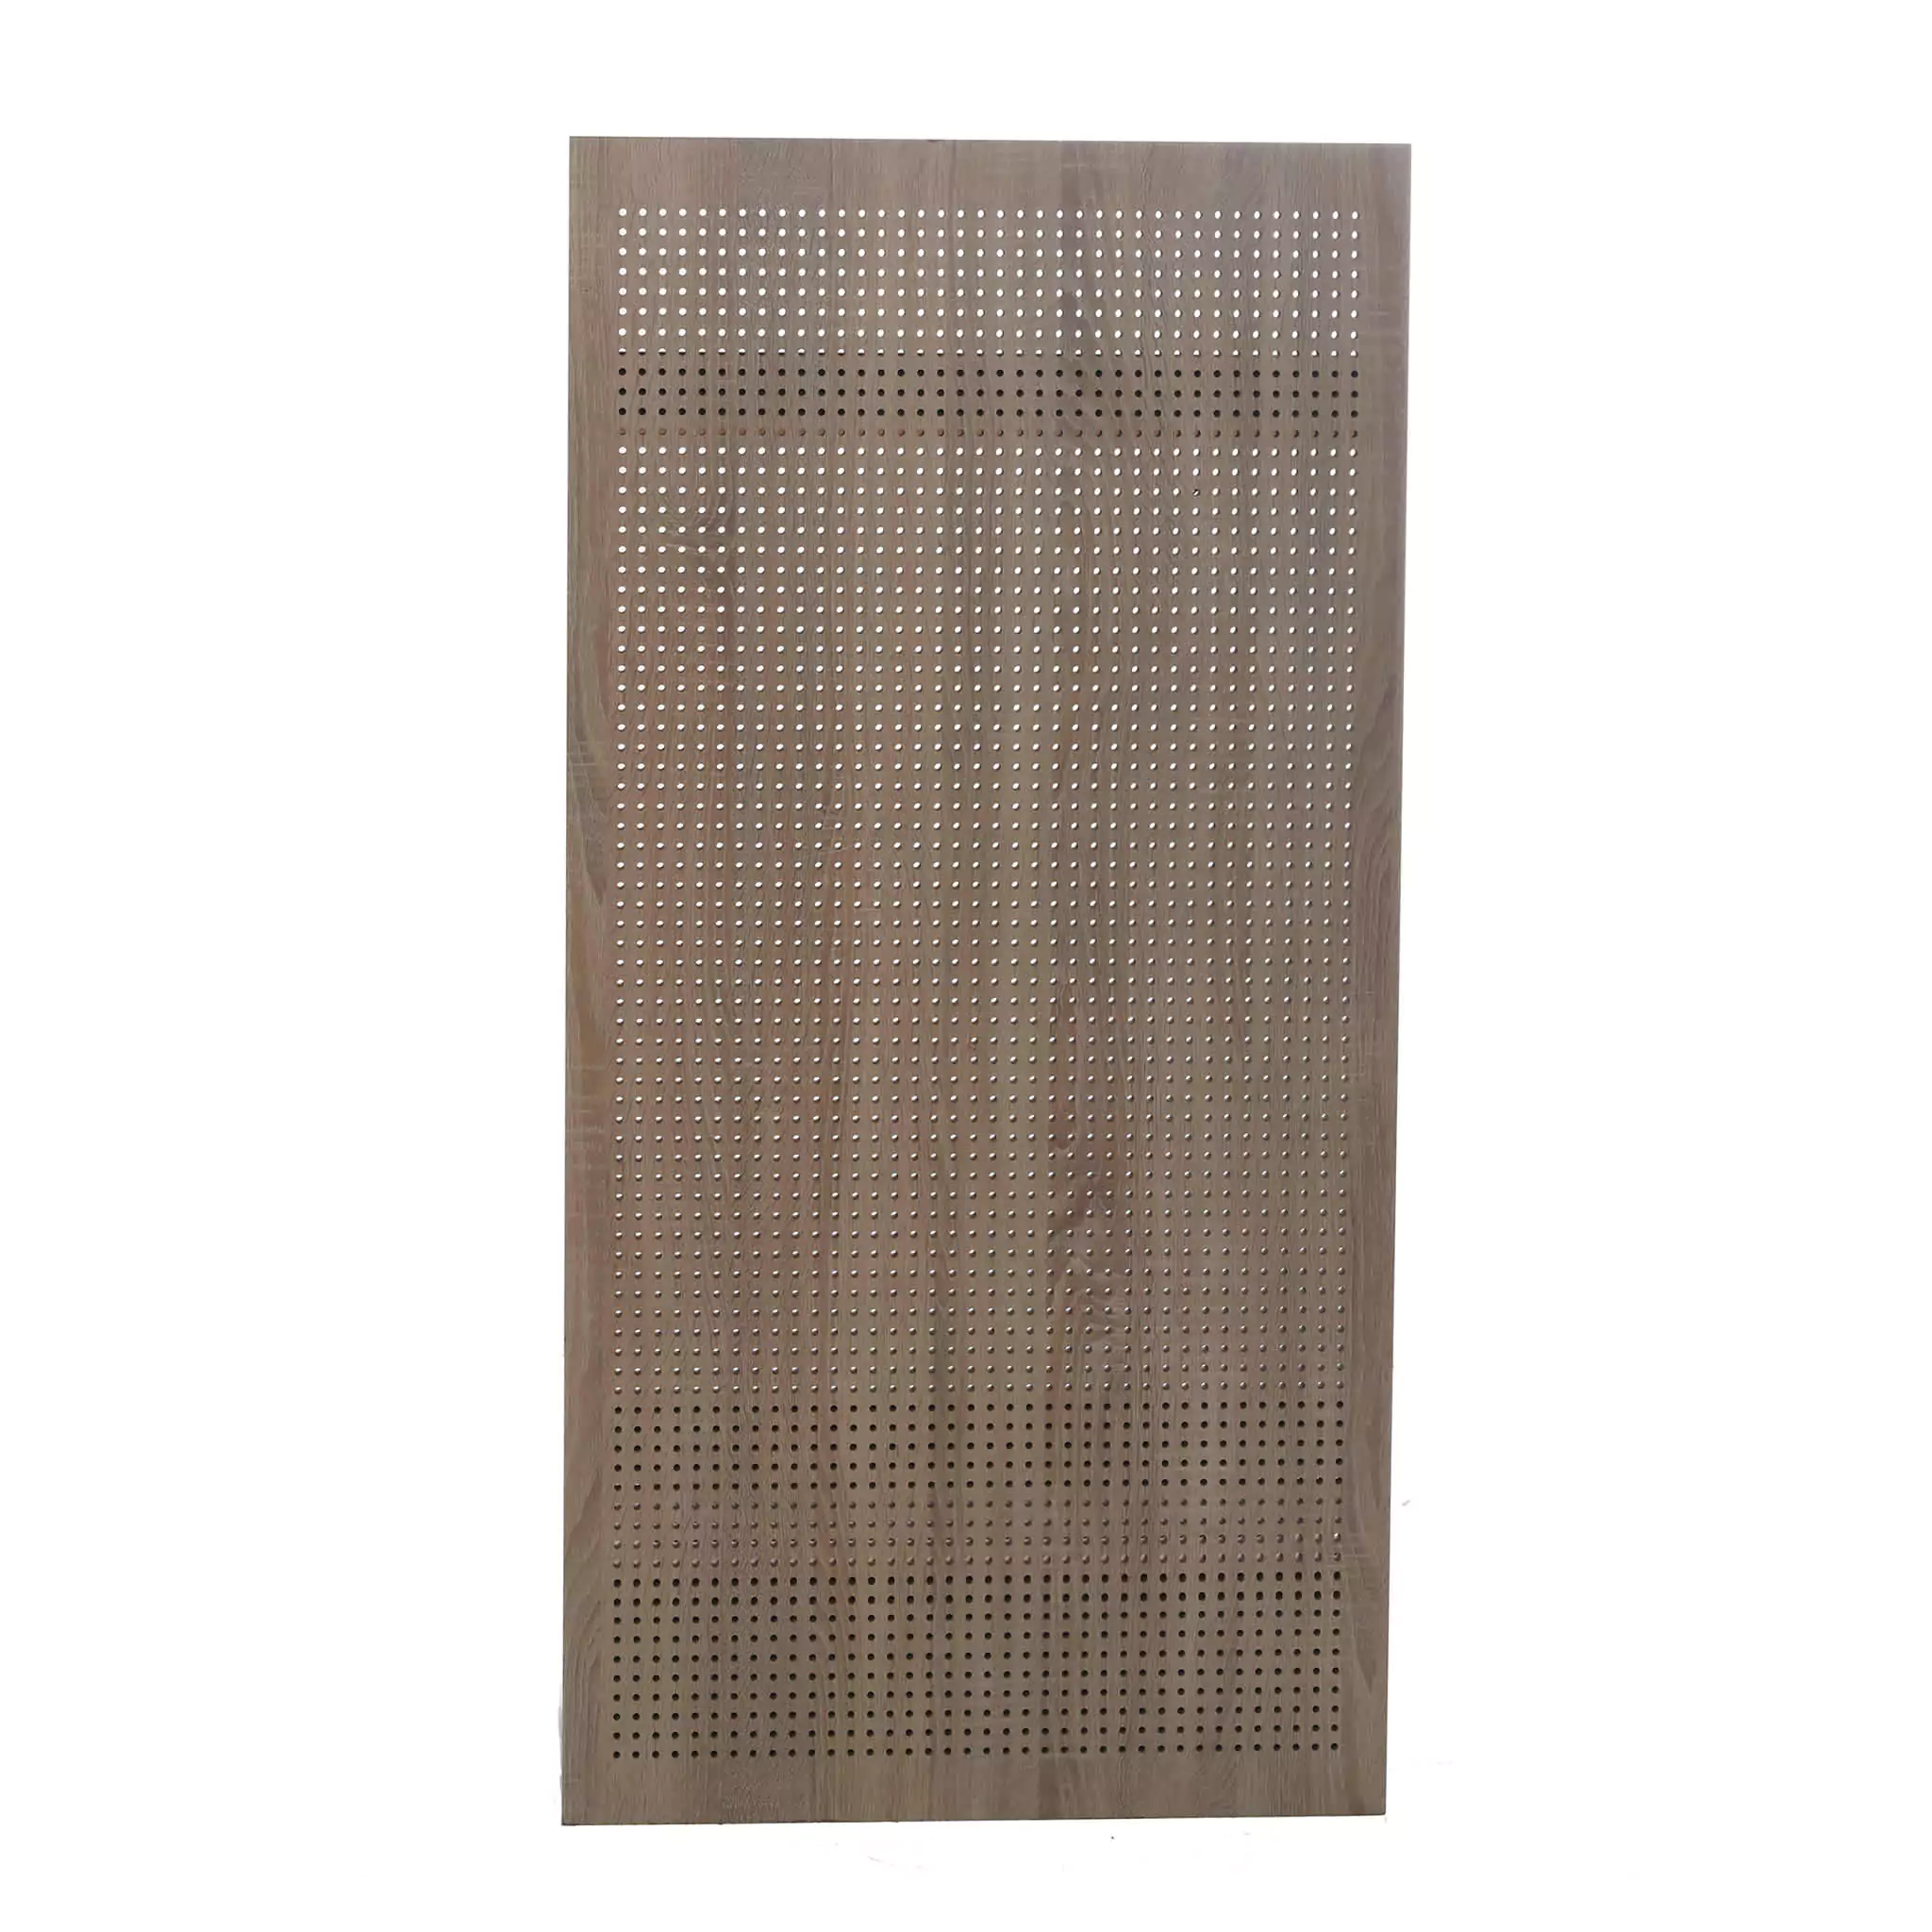 Simko Seating Product Monacoustic Panel Wooden 5